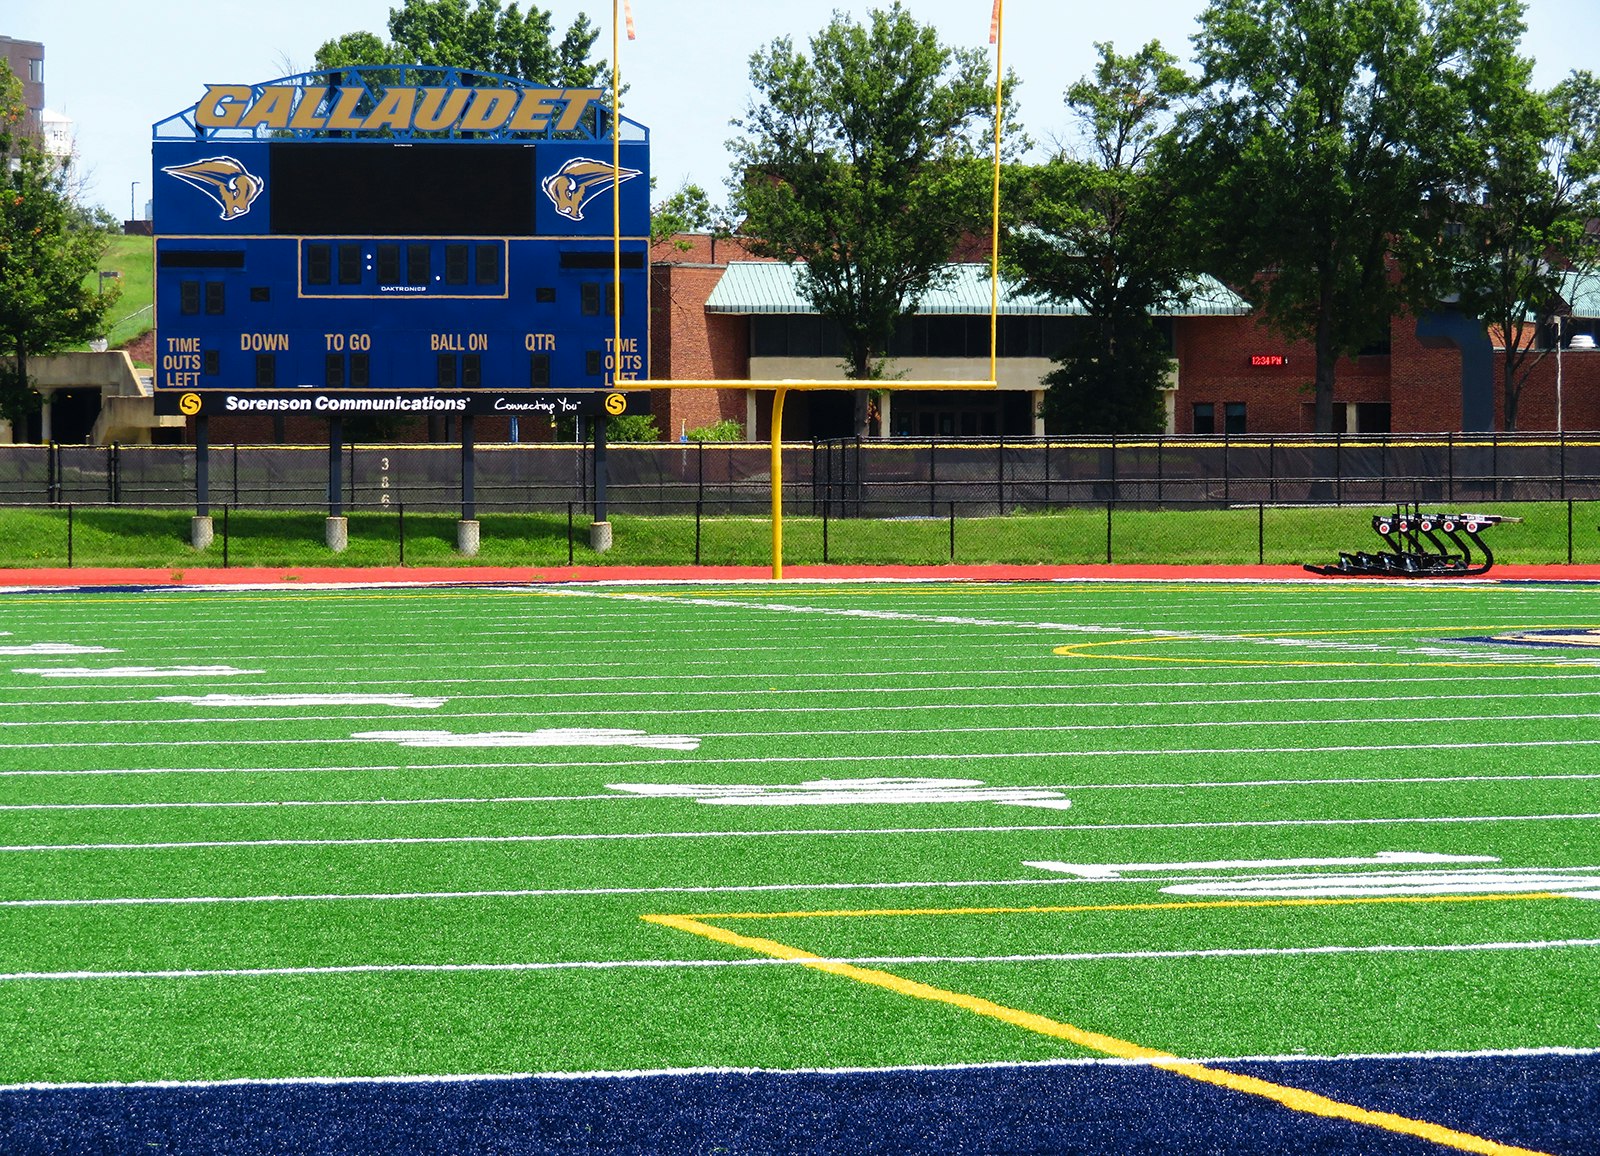 Bright green grass and crisp white numbers mark the yard lines on a football field, with the Gallaudet scoreboard in the background © Barbara Noe Kennedy / Lonely Planet